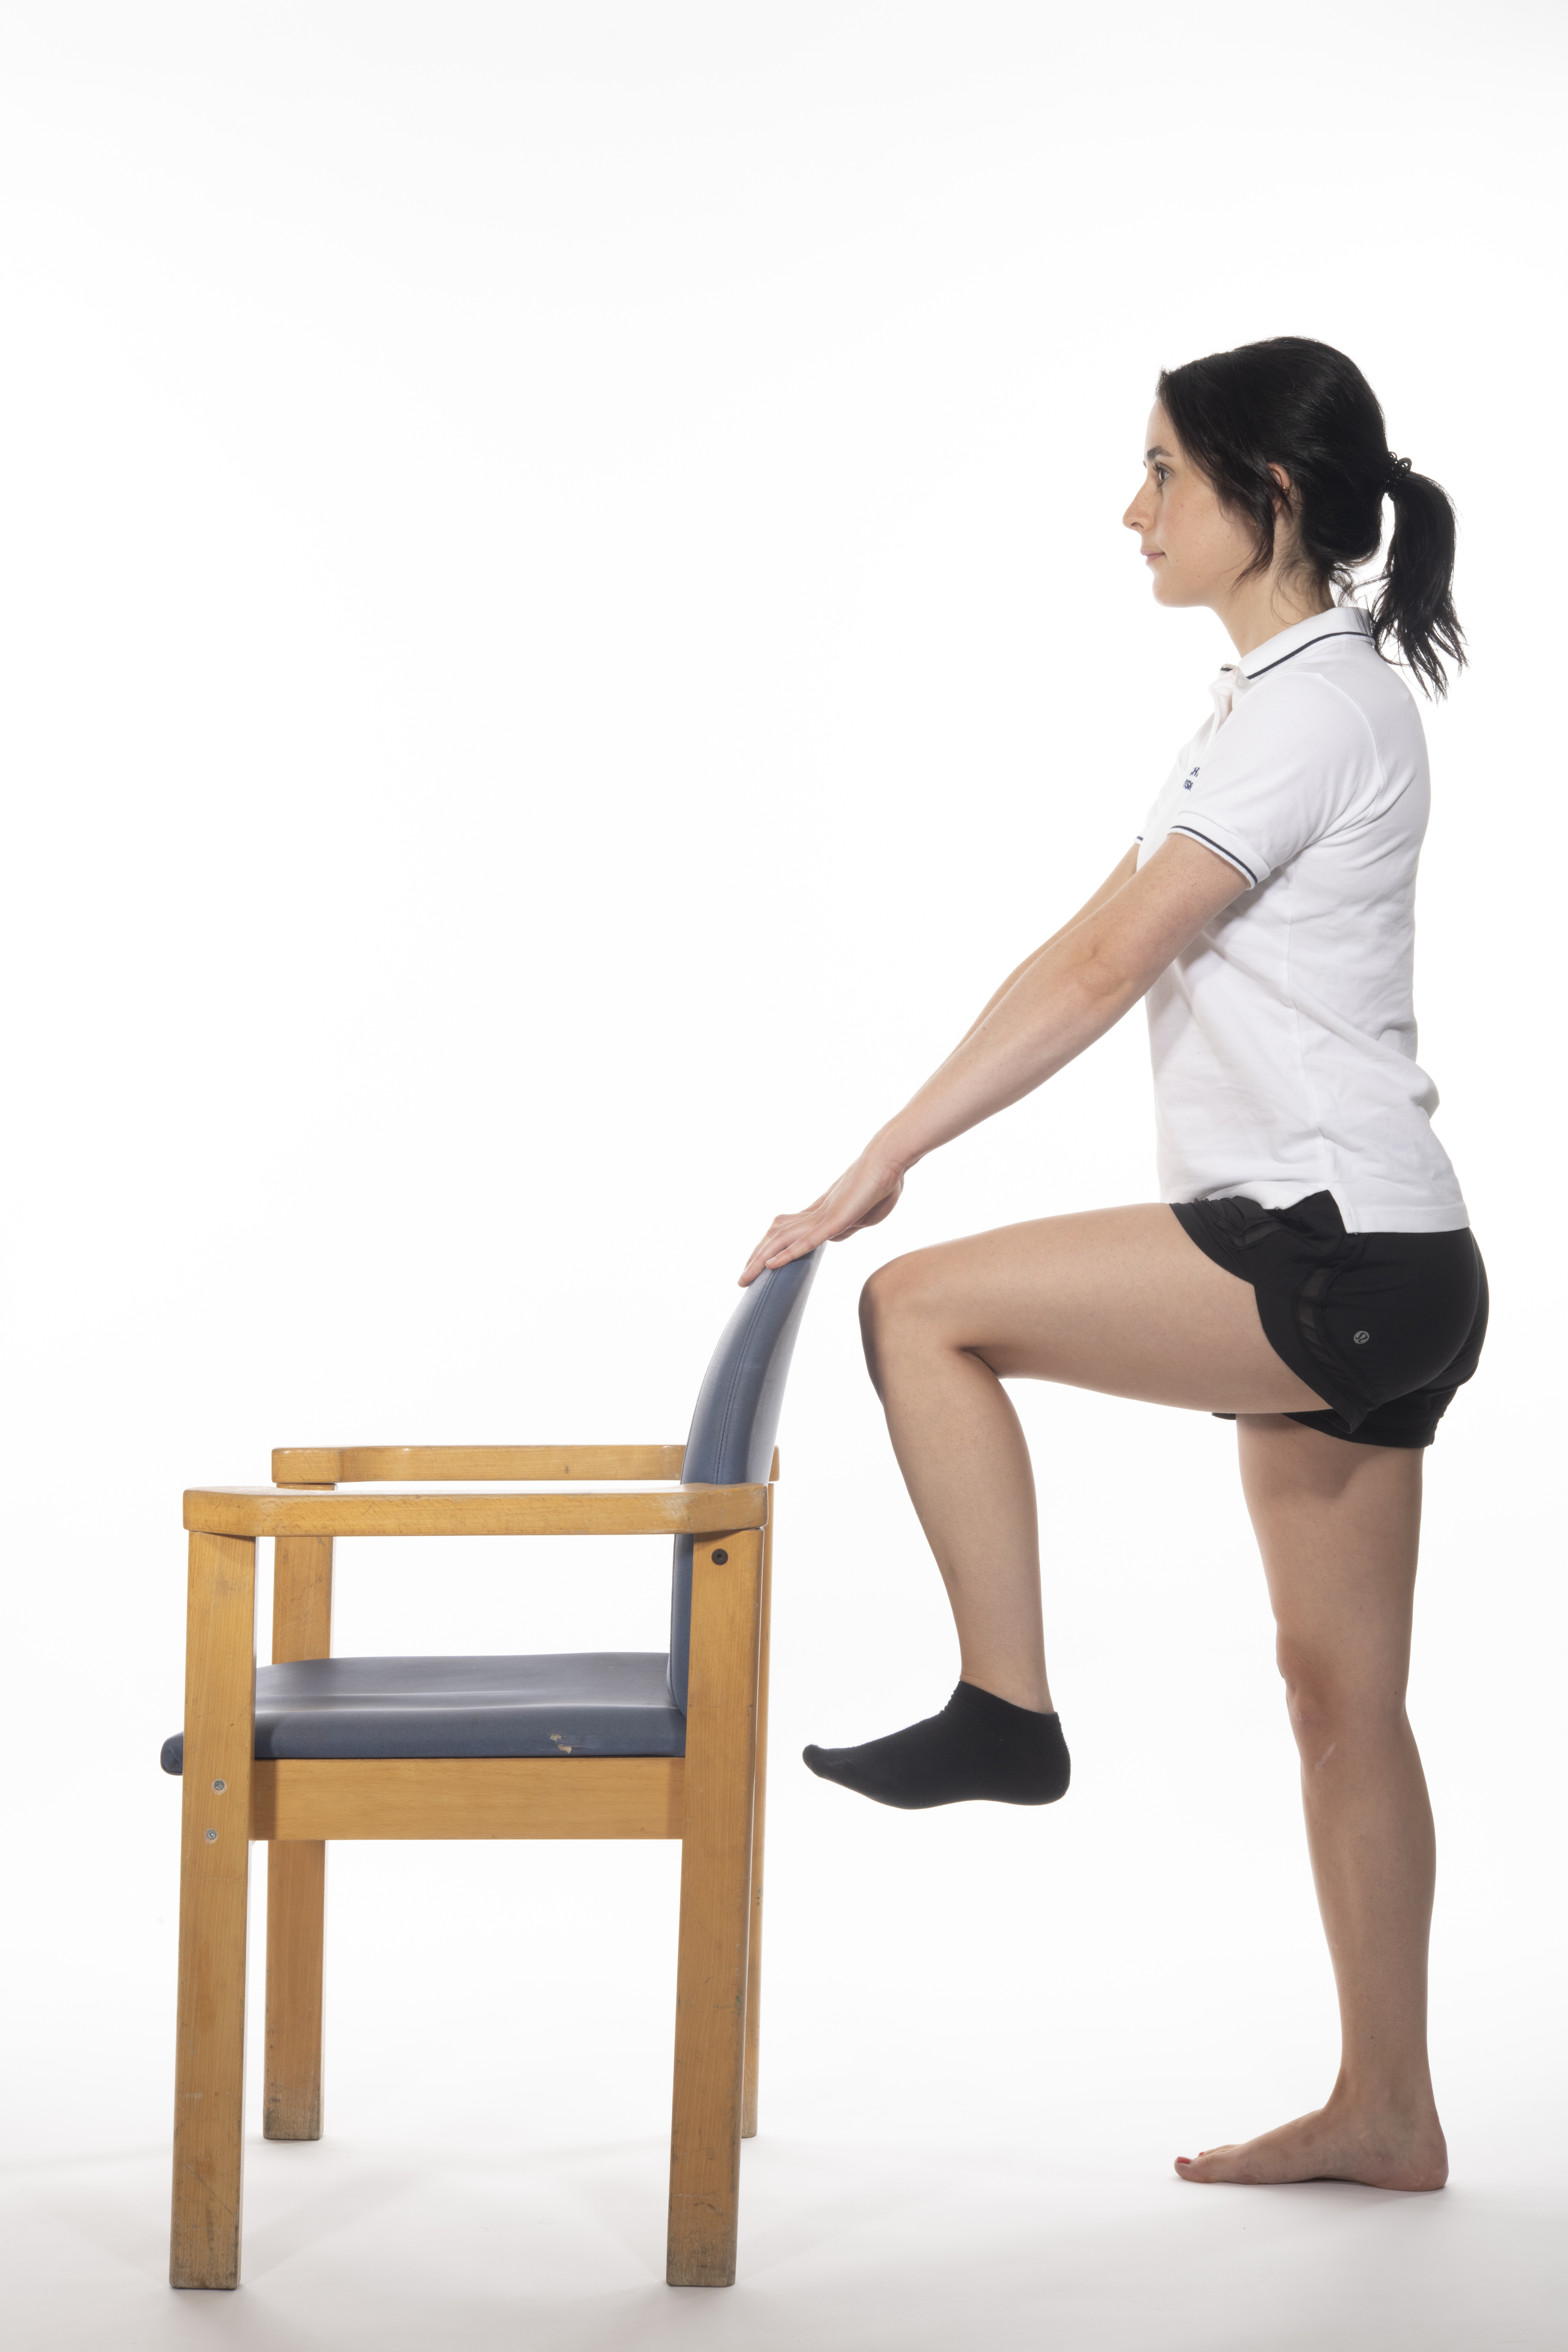 Hip flexion in standing exercise; lift your operated leg, bending your hip and knee up toward your chest